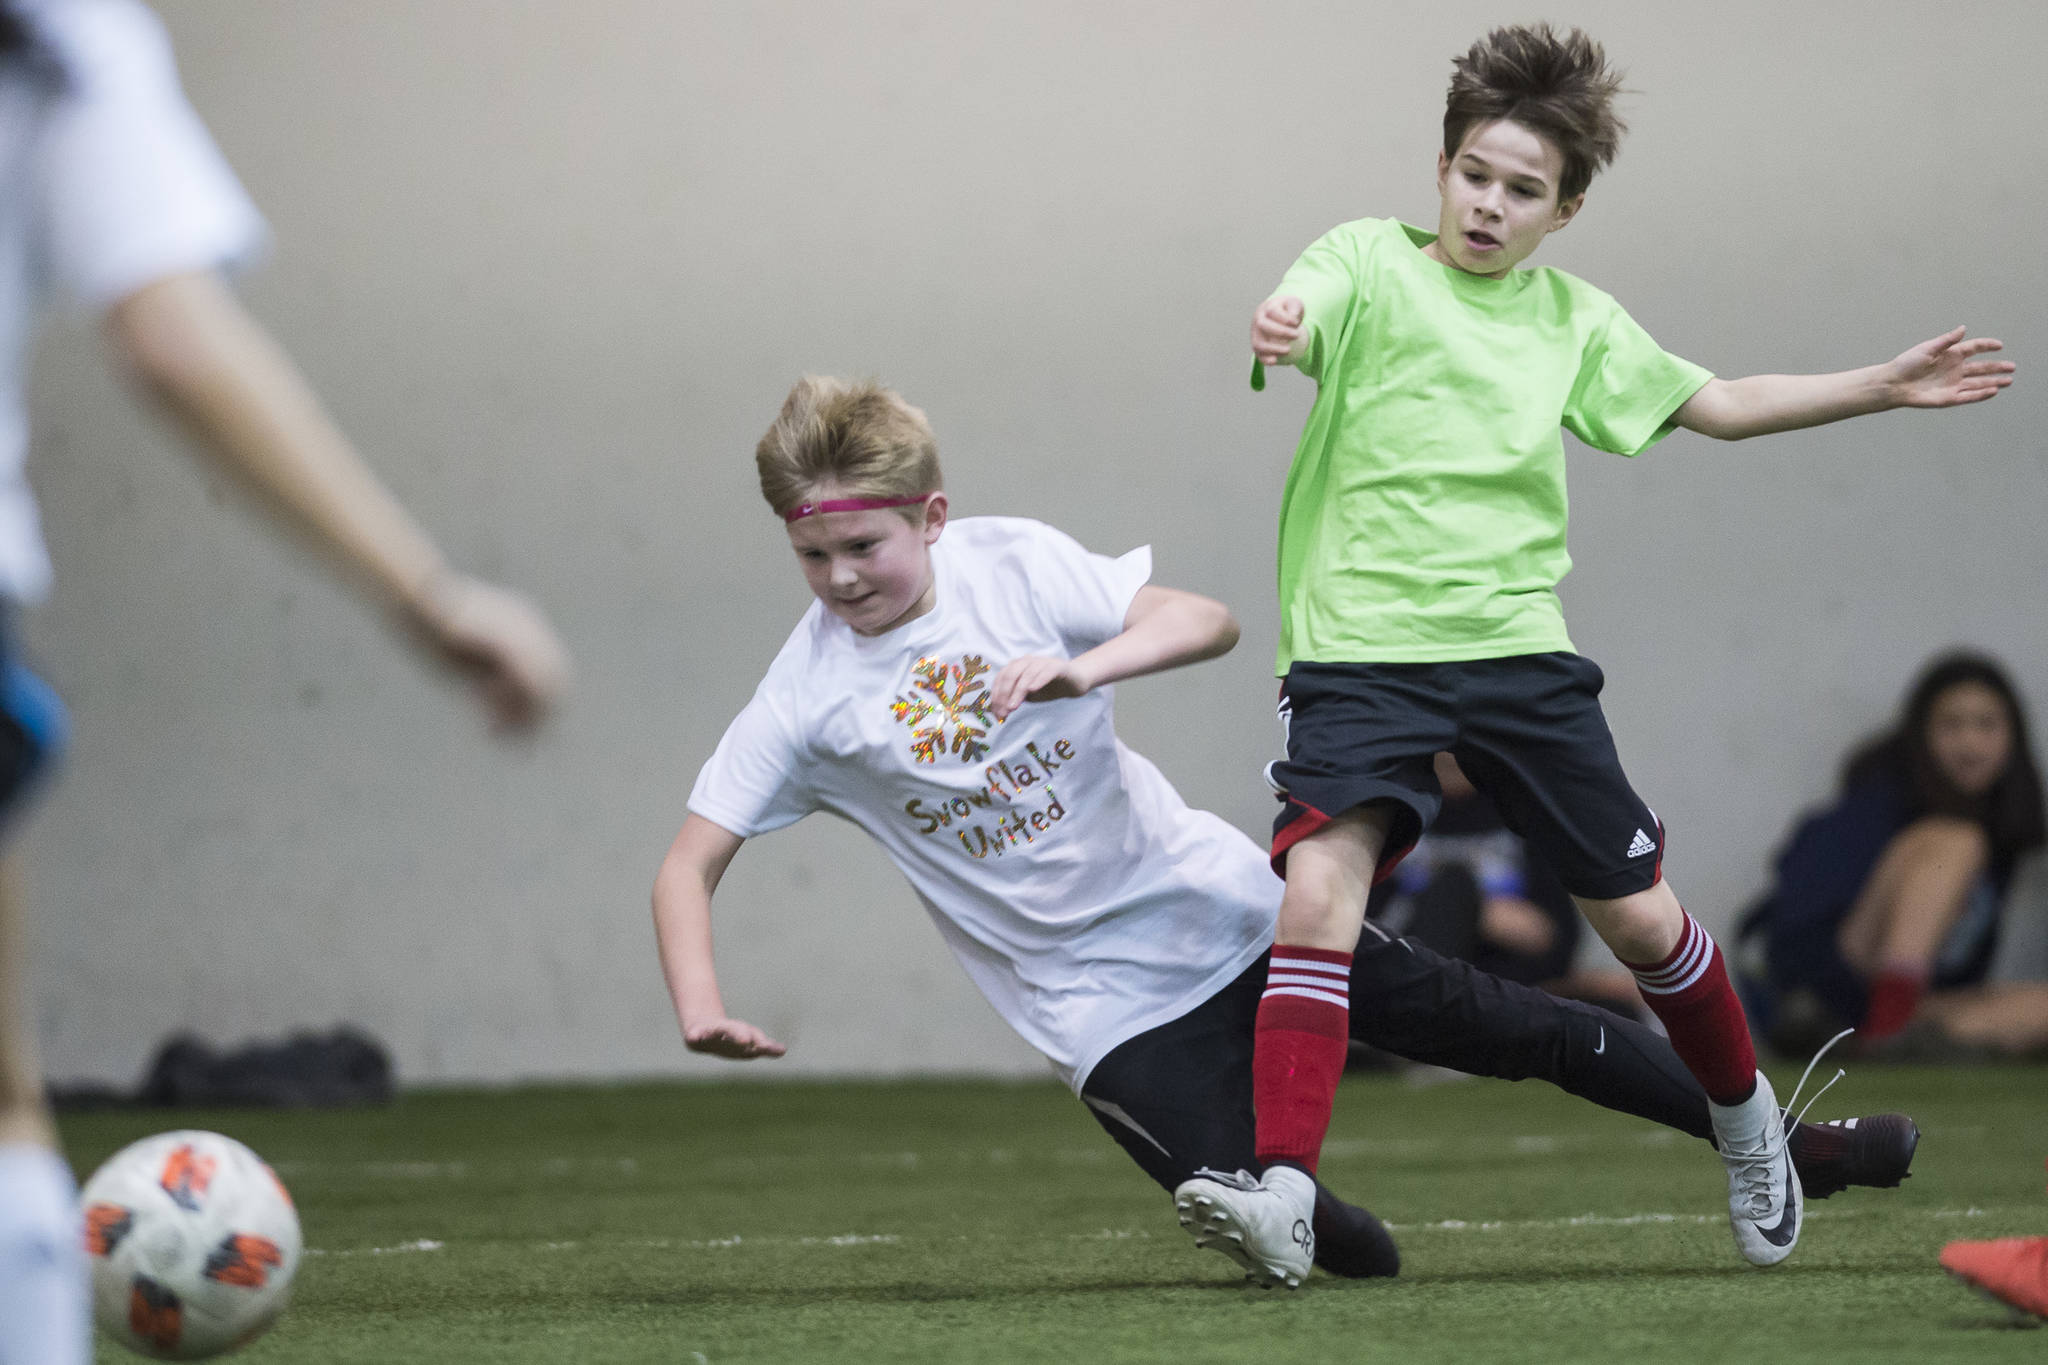 Snowflake United plays against Missile Toes at the annual Holiday Cup Soccer Tournament at the Wells Fargo Dimond Park Field House on Wednesday, Dec. 26, 2018. (Michael Penn | Juneau Empire)